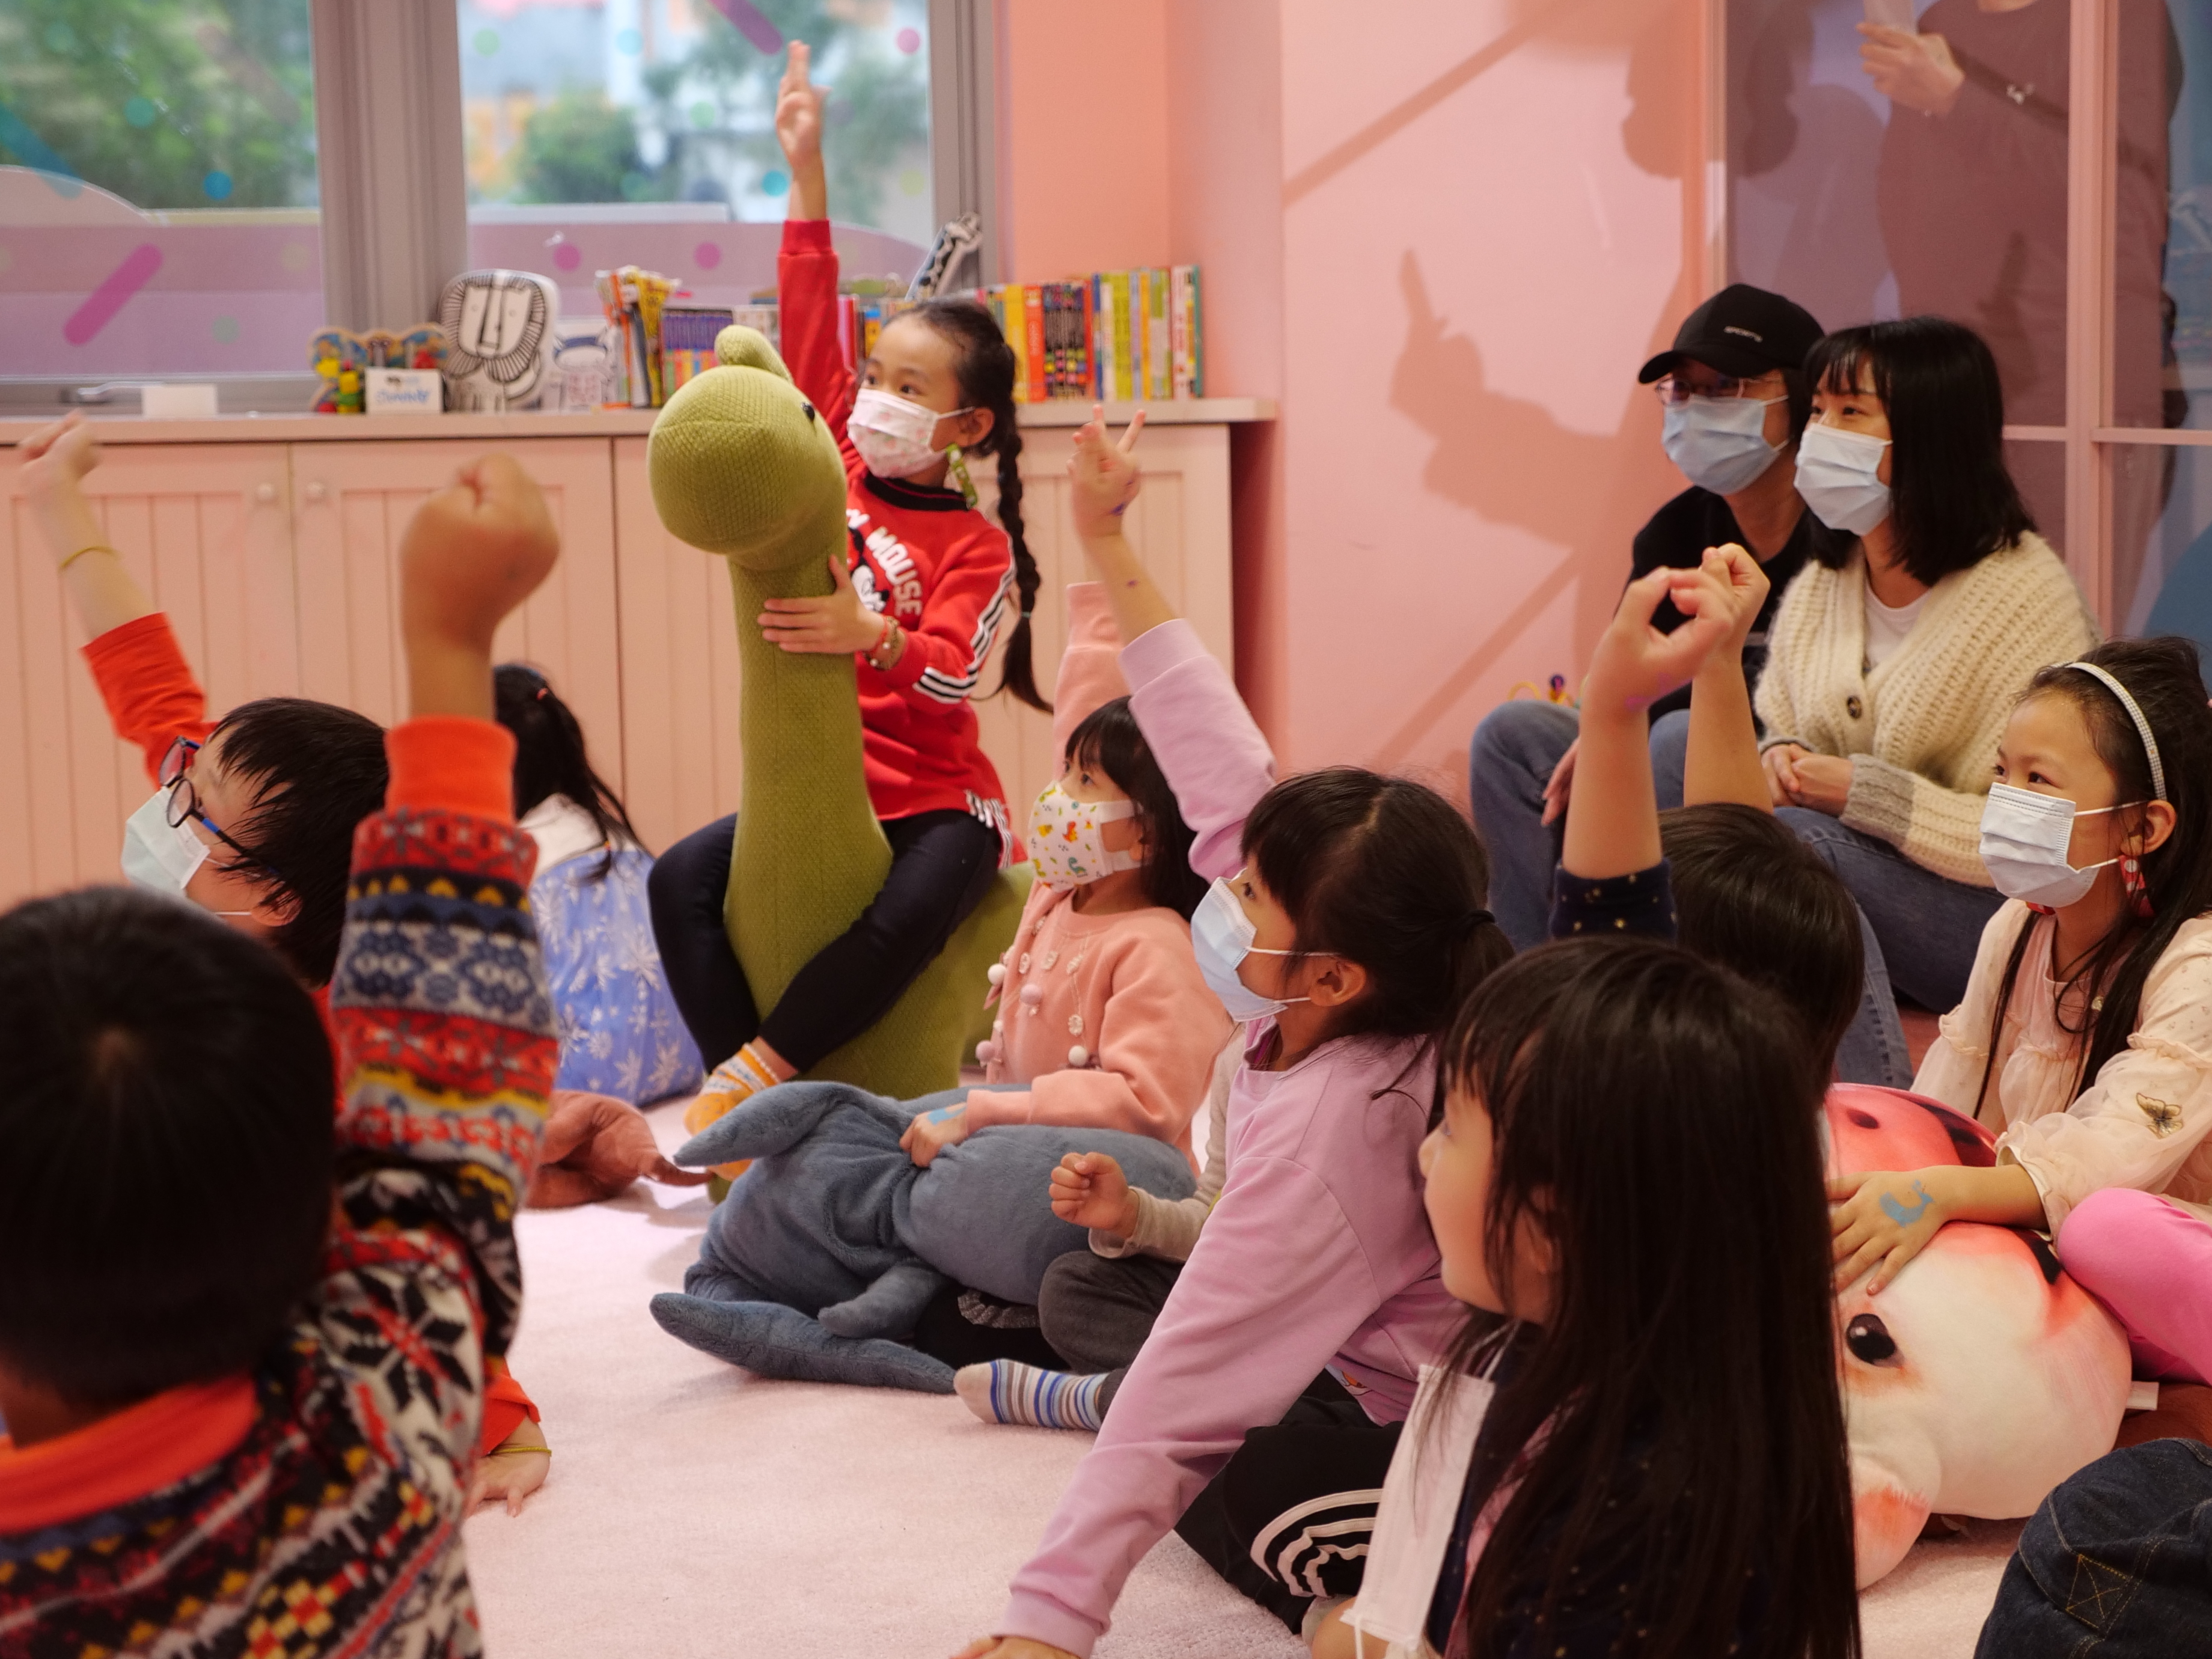 There are activities specially designed for children. (Photo / Provided by張睿弘)